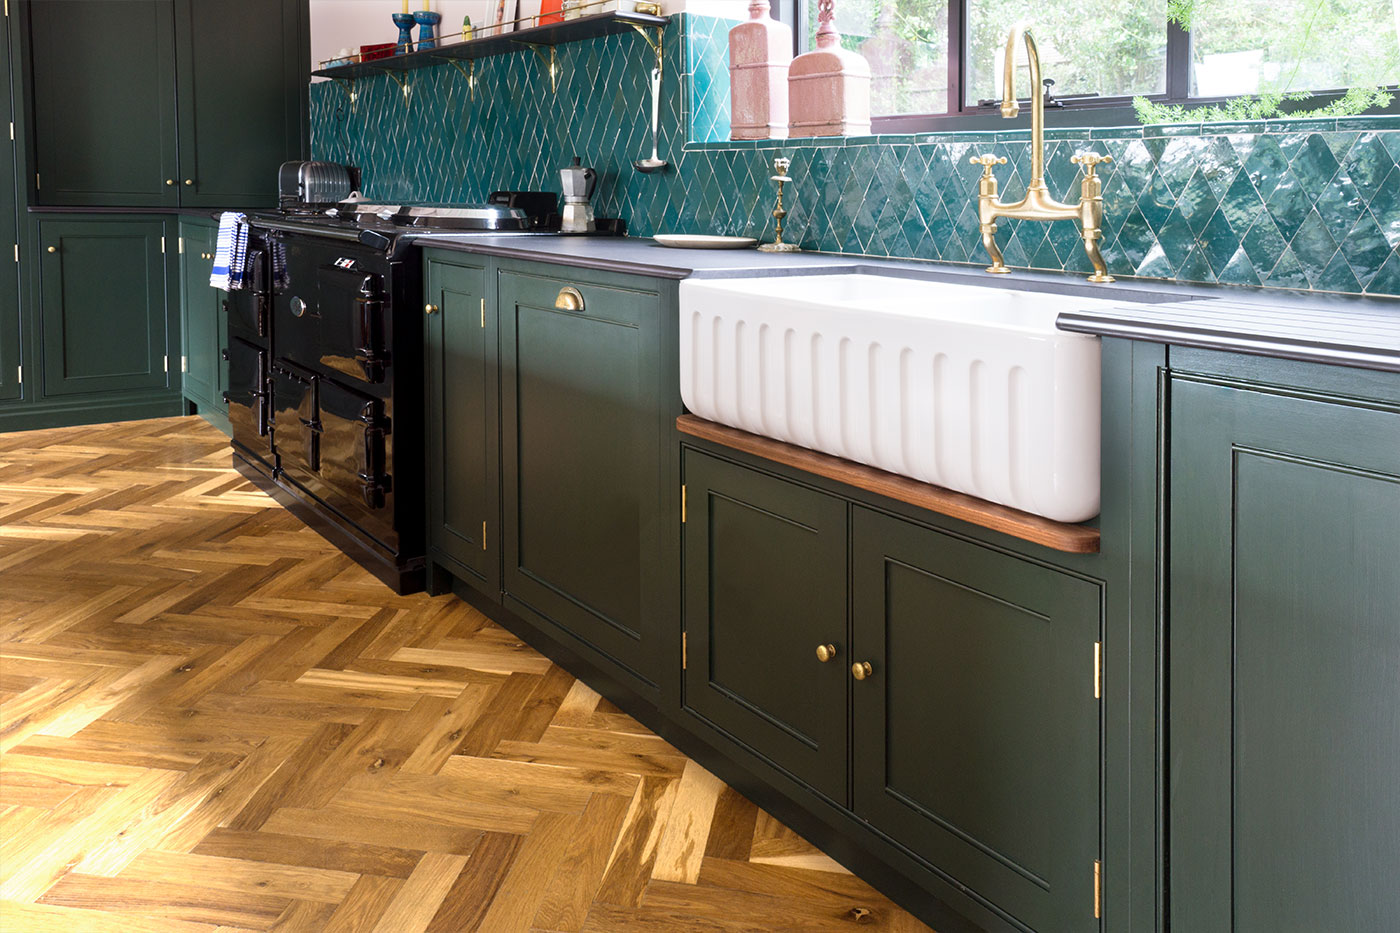 Open plan traditional kitchen, in a dark green, with slate